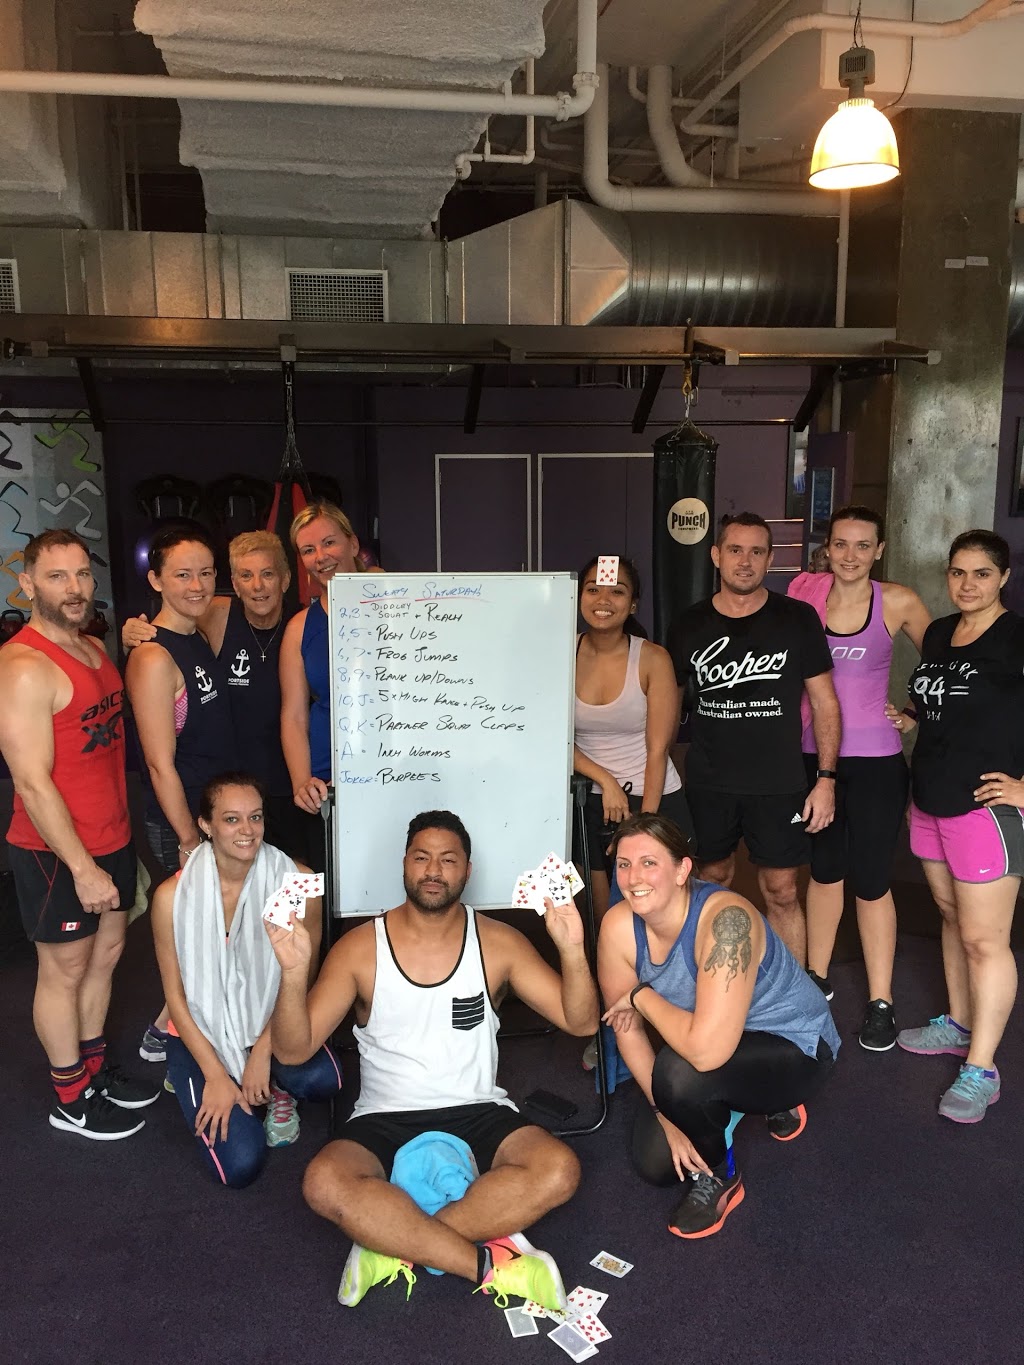 Portside Personal Training | health | Anytime Fitness, 2 Harbour Rd, Hamilton QLD 4007, Australia | 0411829823 OR +61 411 829 823